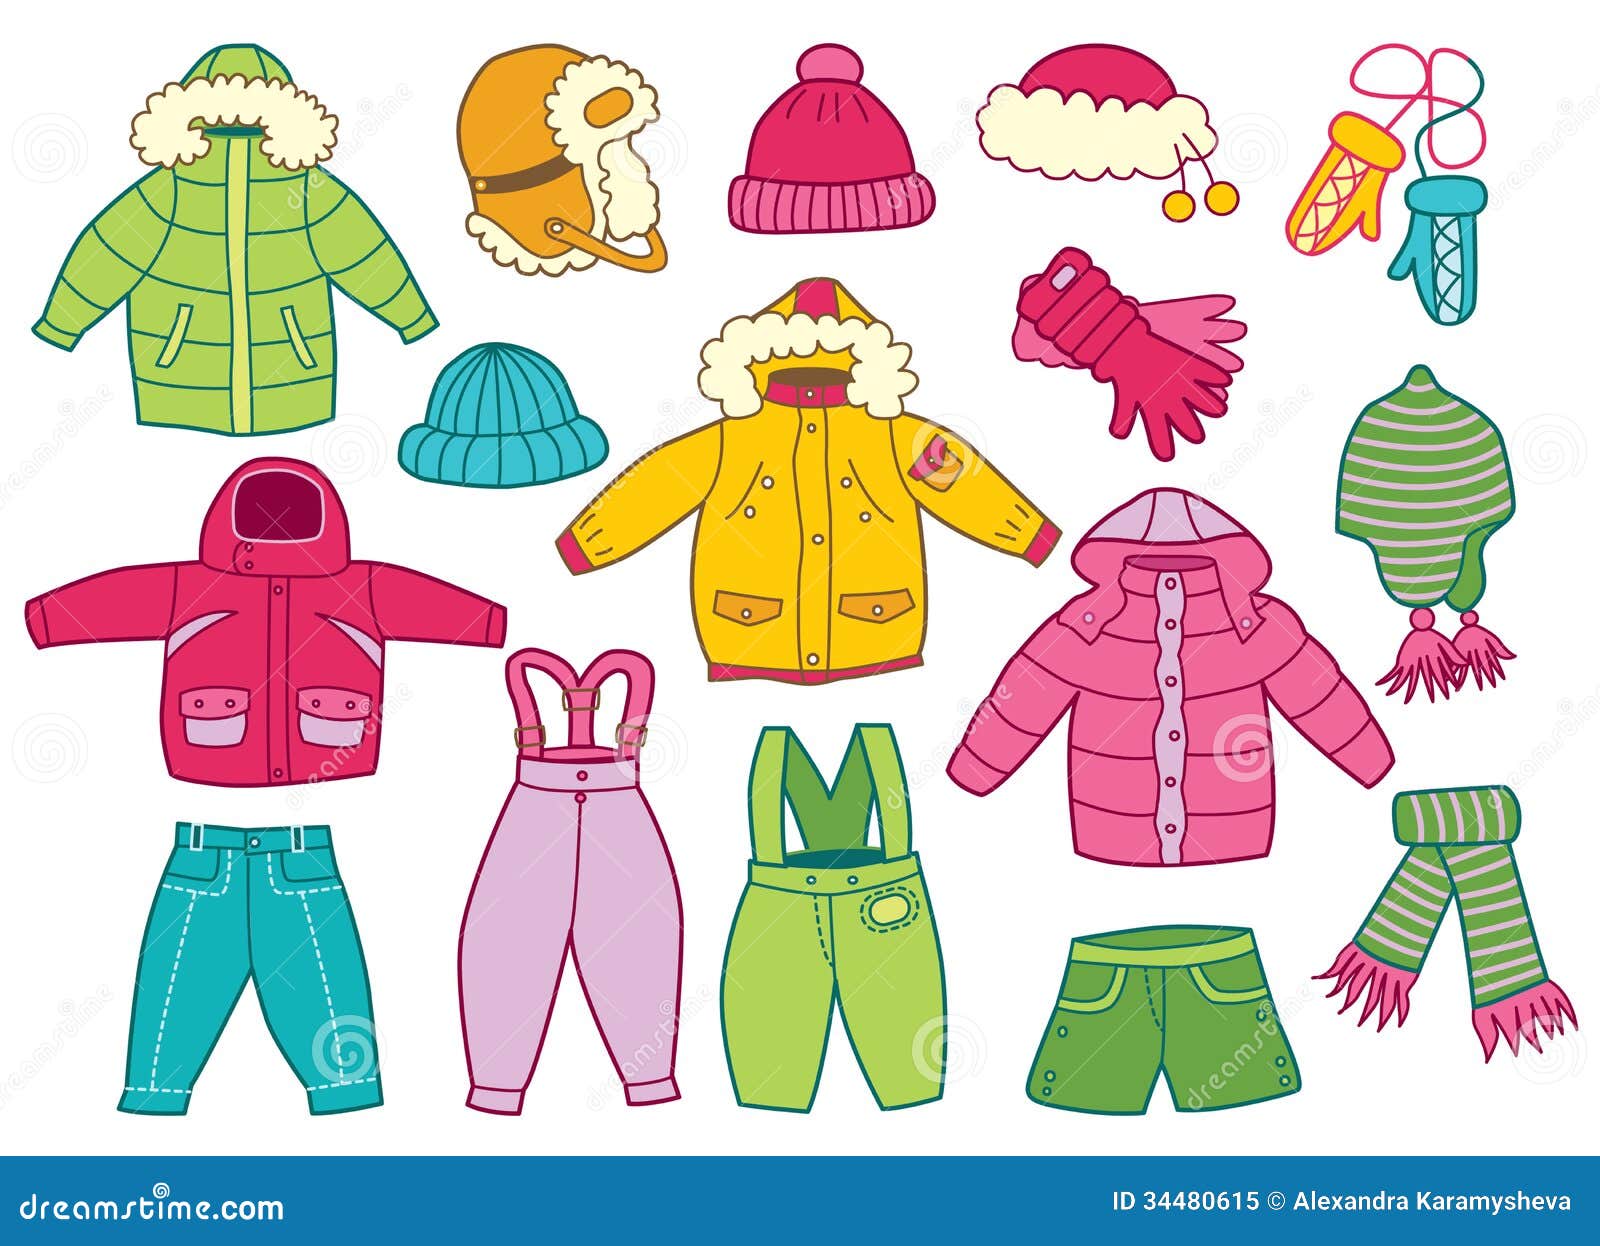 winter clothes clipart - photo #17